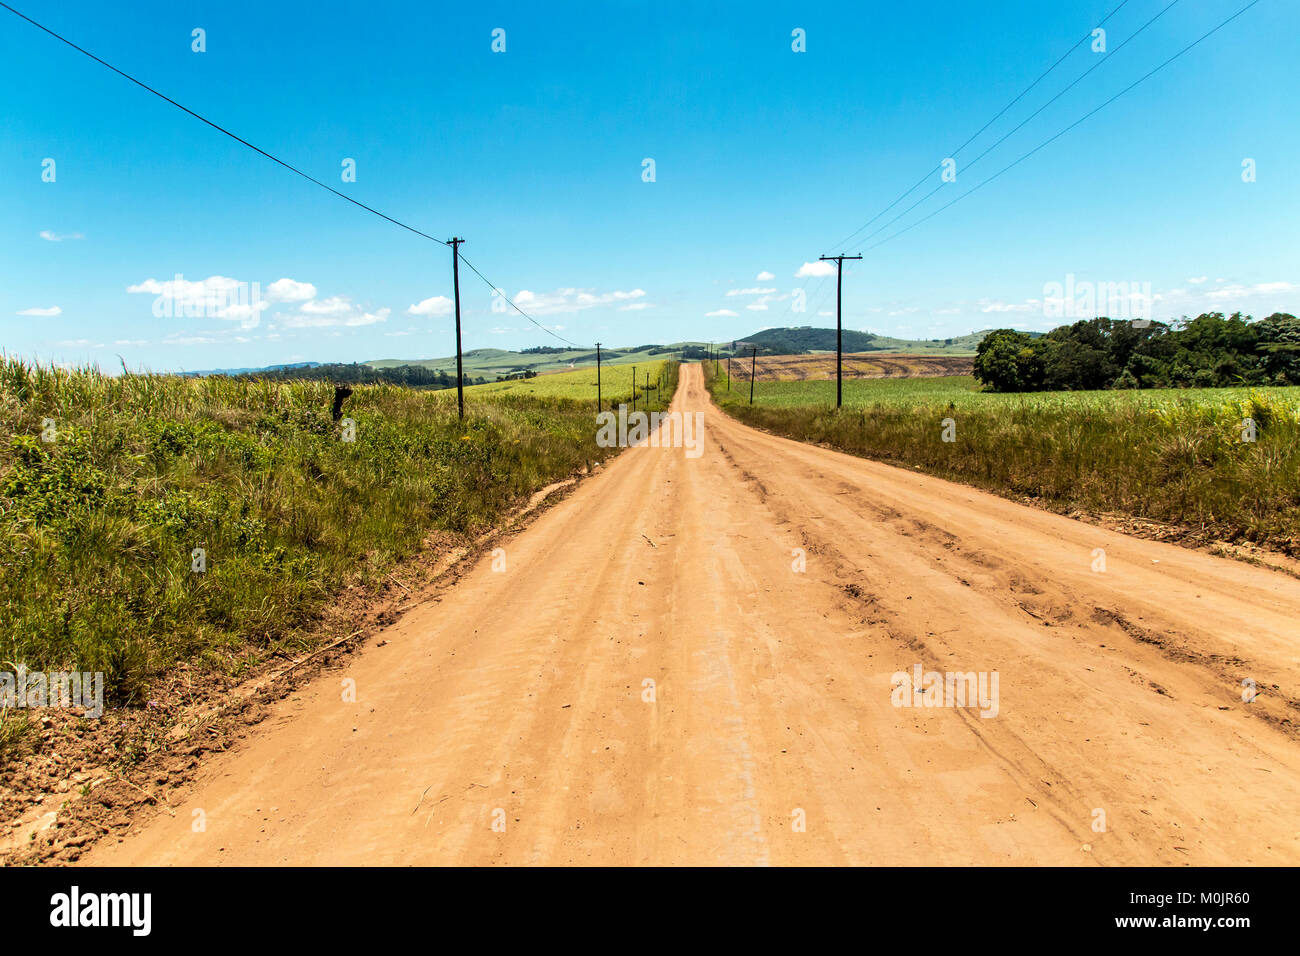 Dirt road leading through green sugar cane plantations against blue sky in Eshowe, South Africa Stock Photo